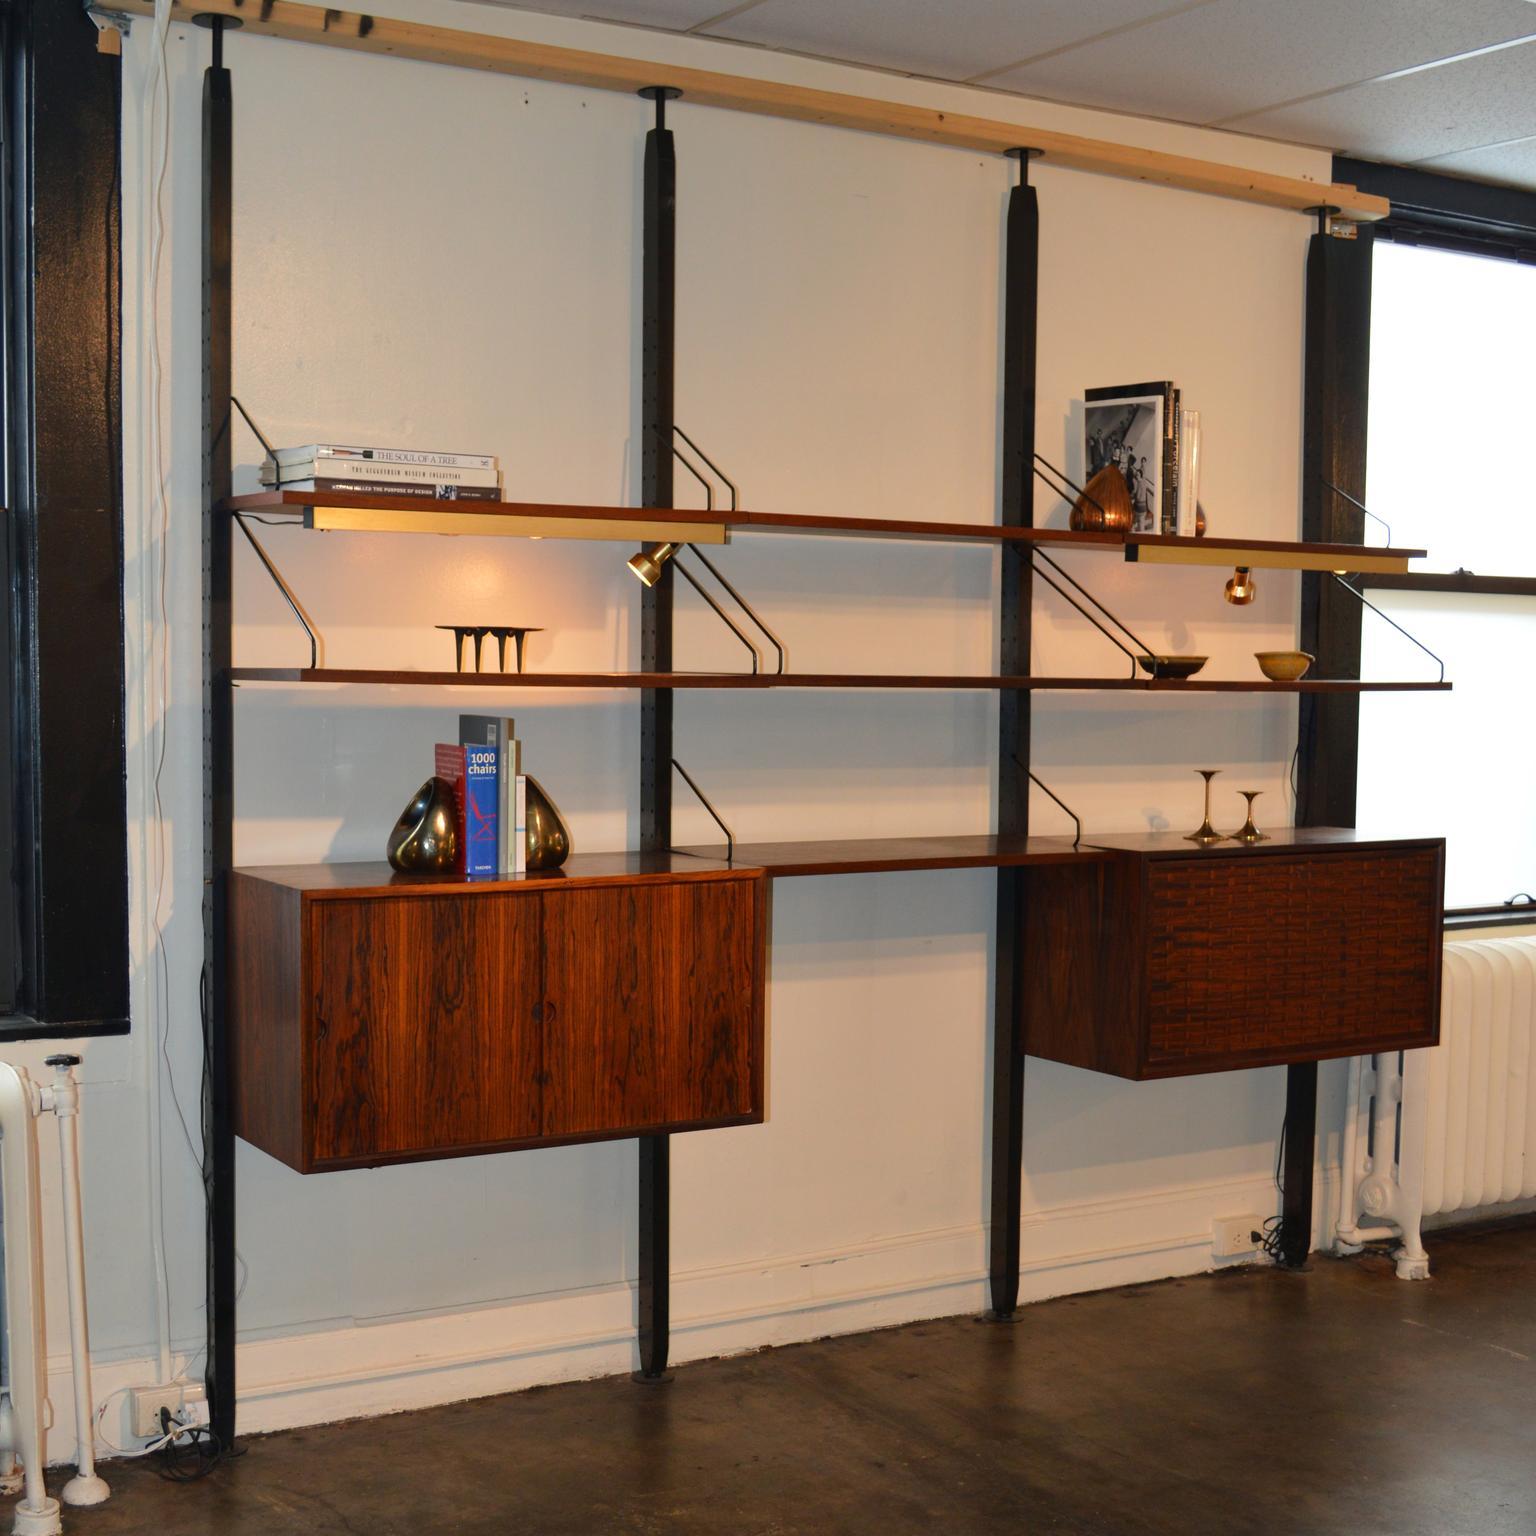 Wall unit designed by Poul Cadovius in 3 bays, 8 shelves, 2 cabinets. This system is both rare and stunning, made from Brazilian rosewood. A seldom-seen tension pole system creates pressure on the floor and ceiling with spring-loaded feet in the